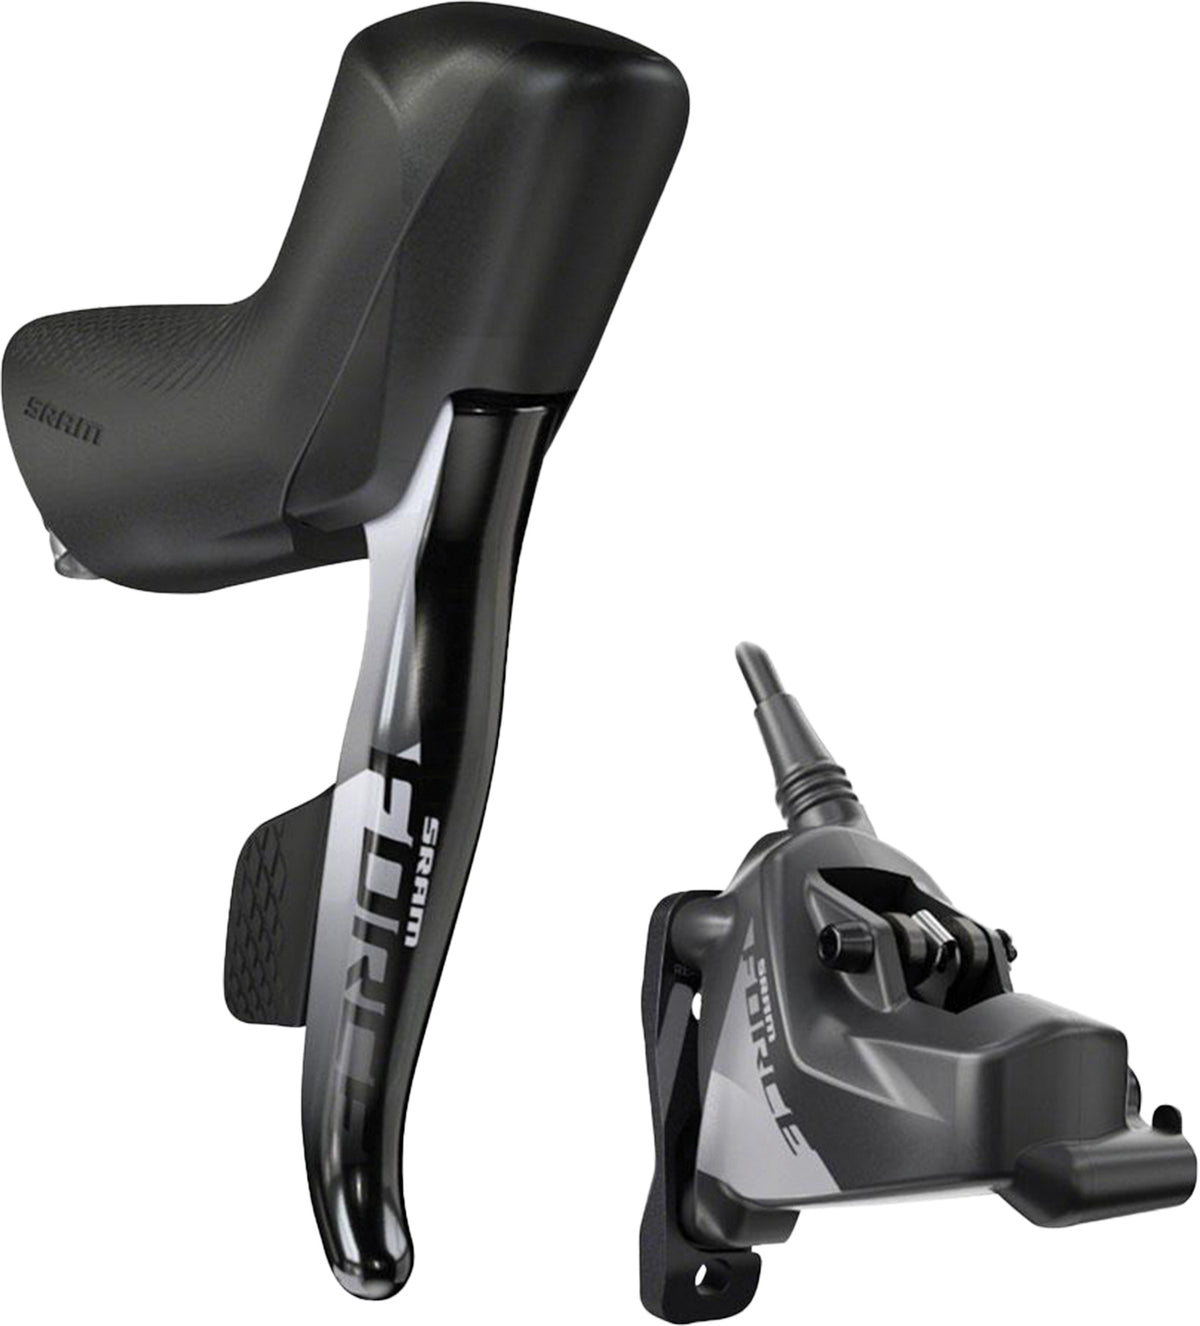 Sram Force AXS Shift Lever and Hydraulic Brake